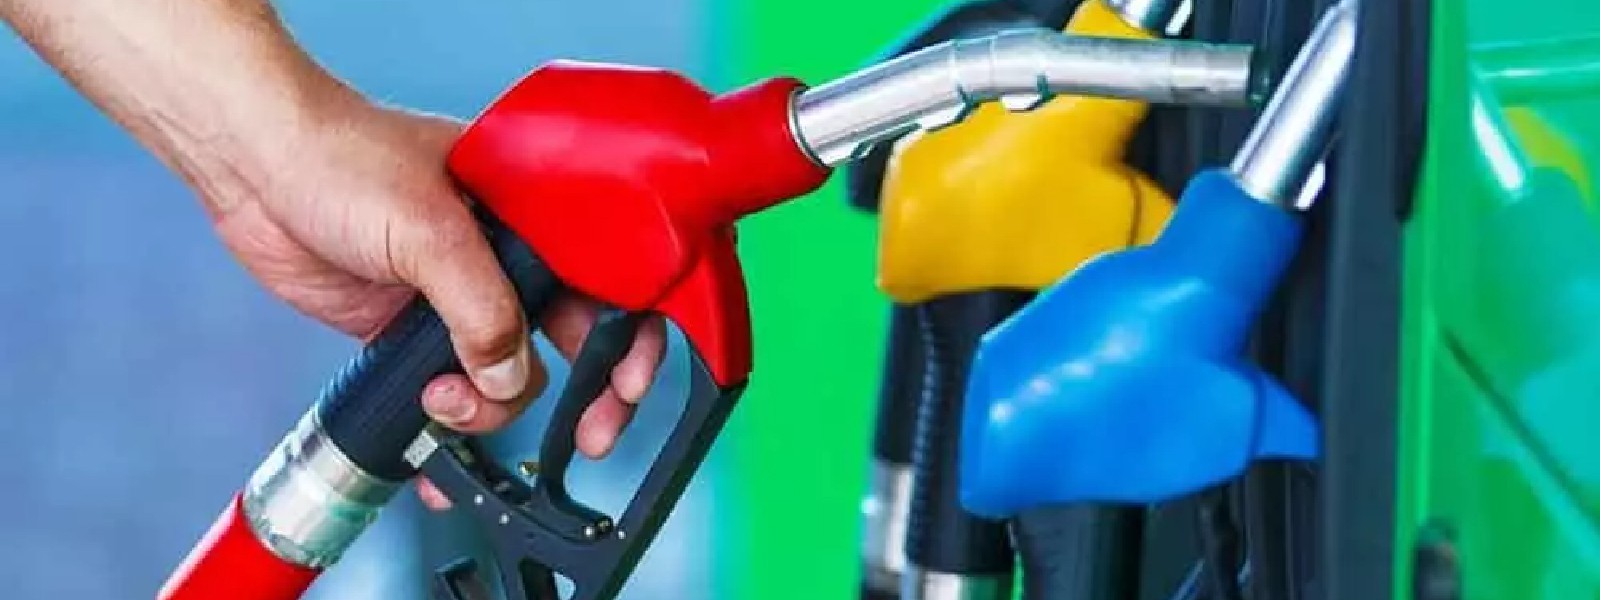 Tests conducted to determine quality of 92 & 95 Octane petrol